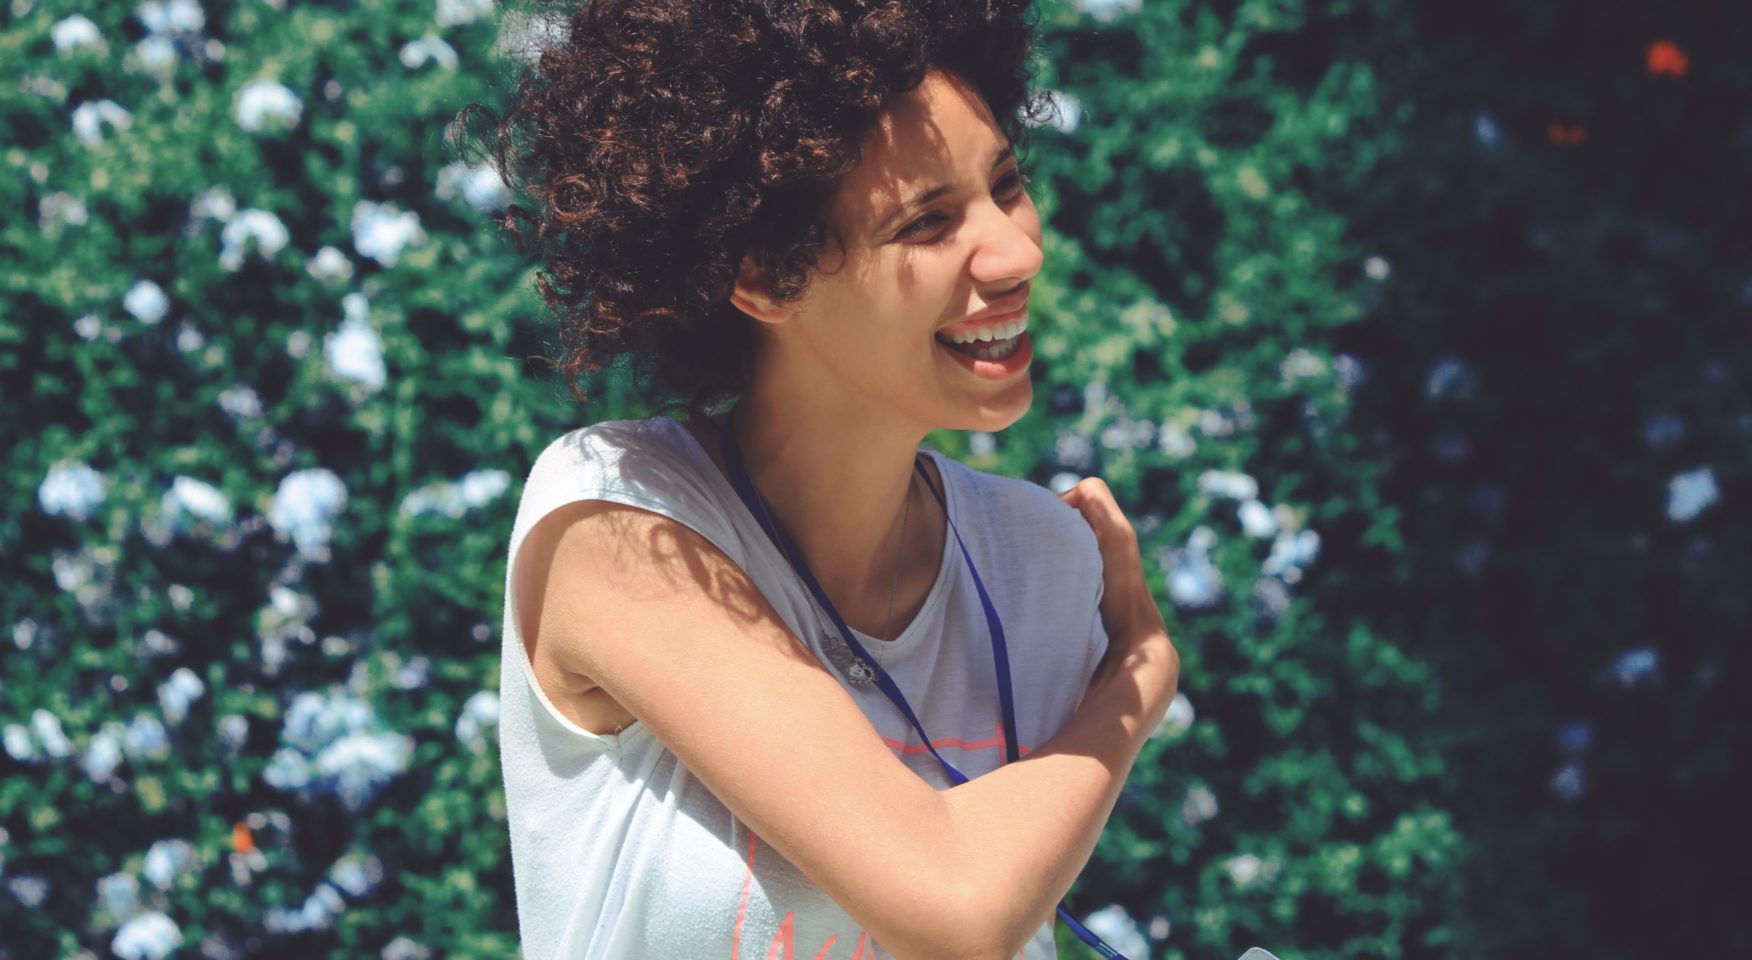 Smiling woman with curly brown hair